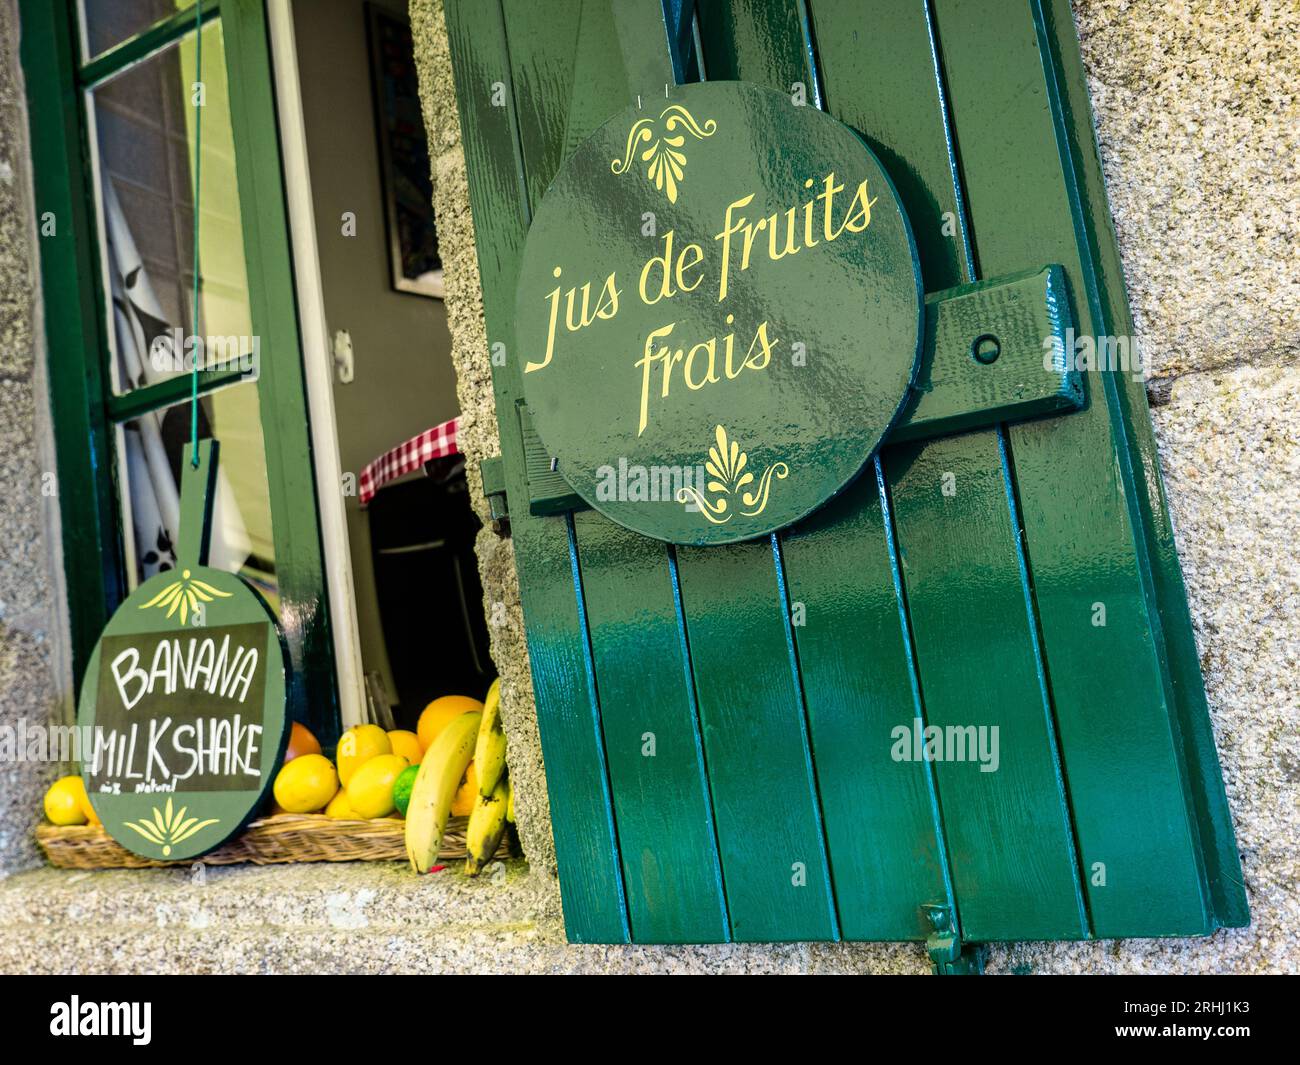 French fresh fruit juice and banana milkshake on sale out of simple Concarneau home producing a succesful business from tourism Brittany France Stock Photo